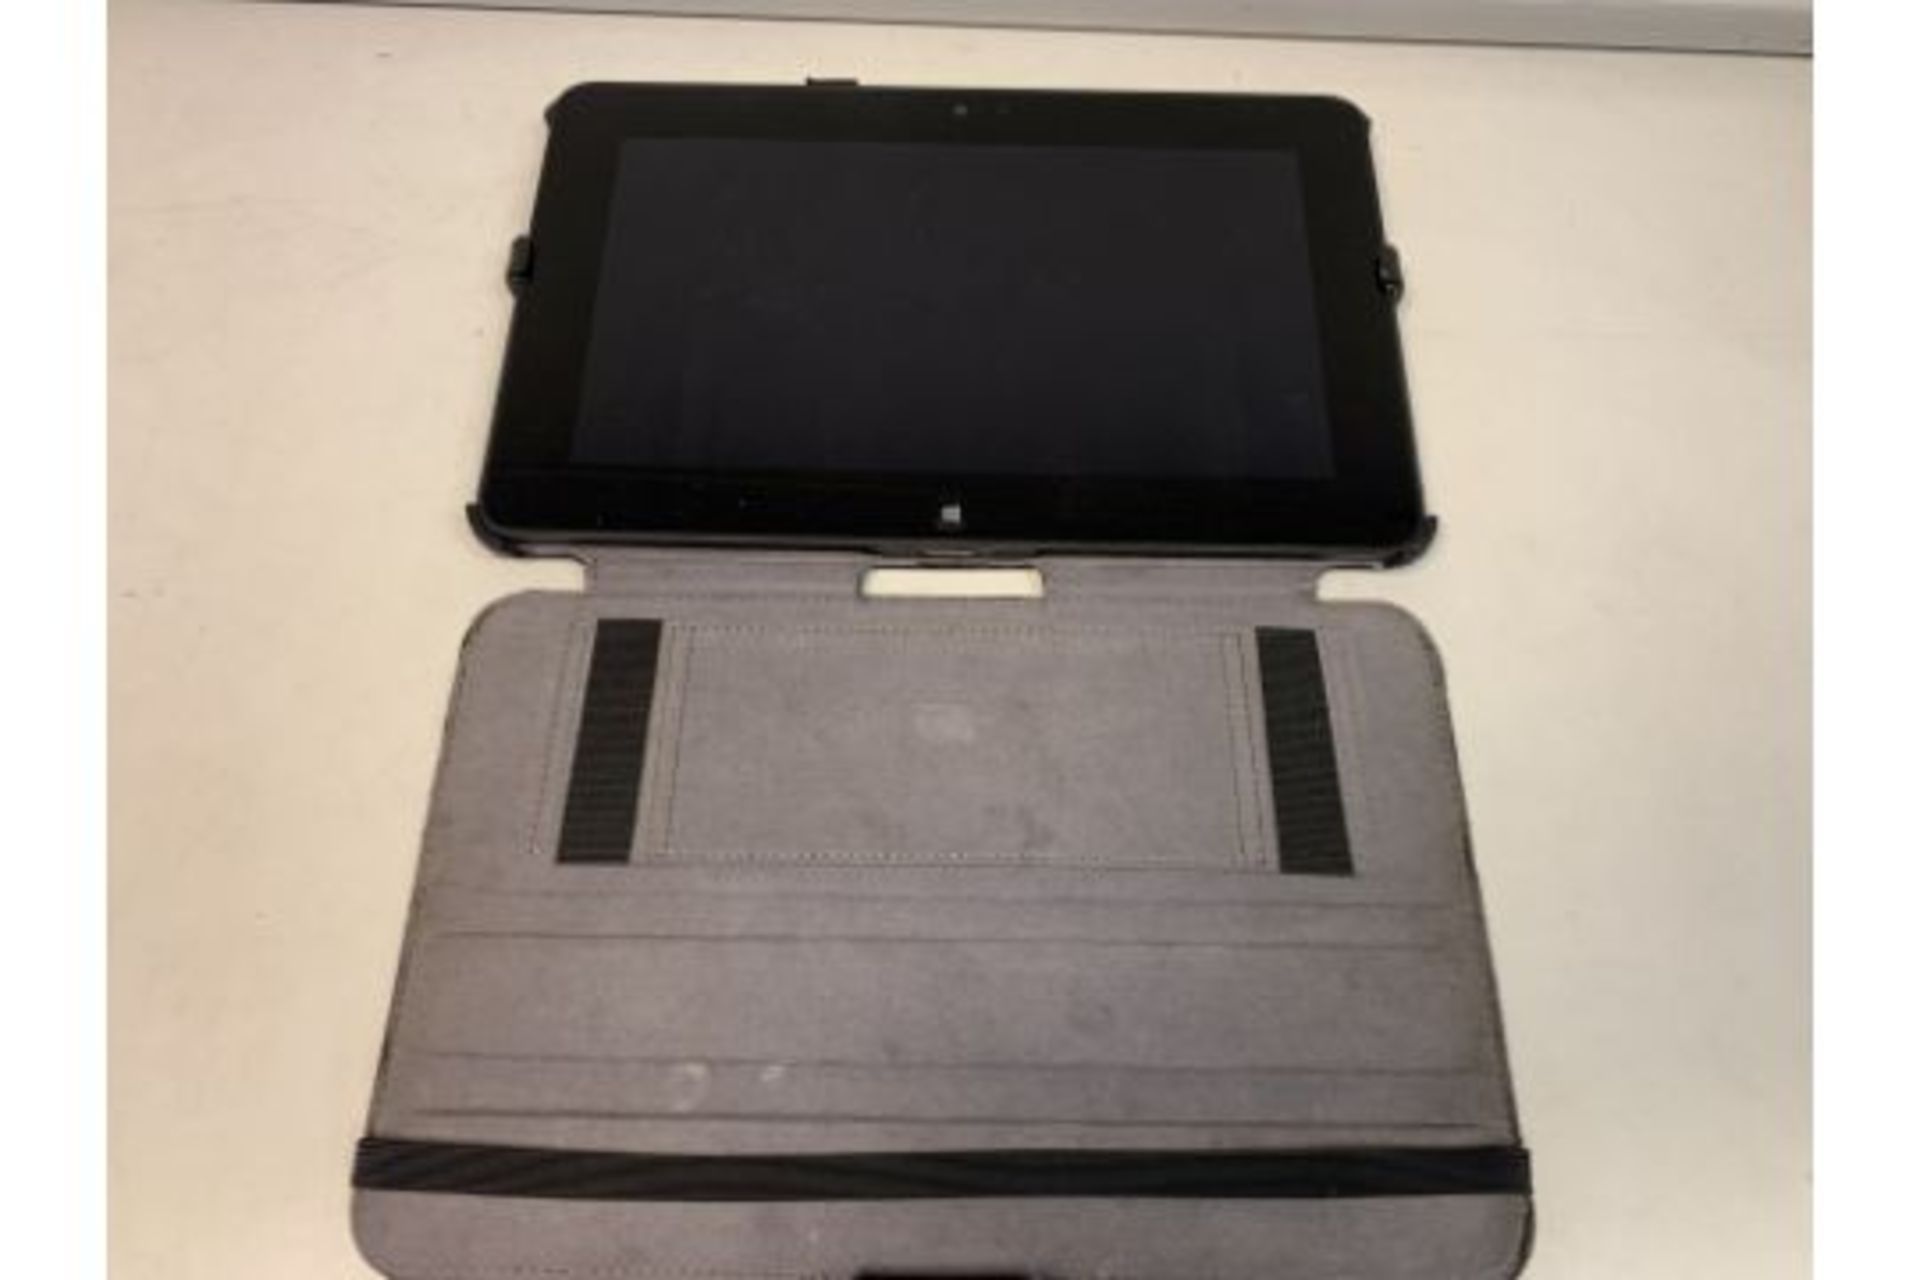 DELL LATITUDE ST2 TABLET, WINDOWS 8 PRO, 64GB STORAGE WITH CHARGER AND CASE (31) (810/3)